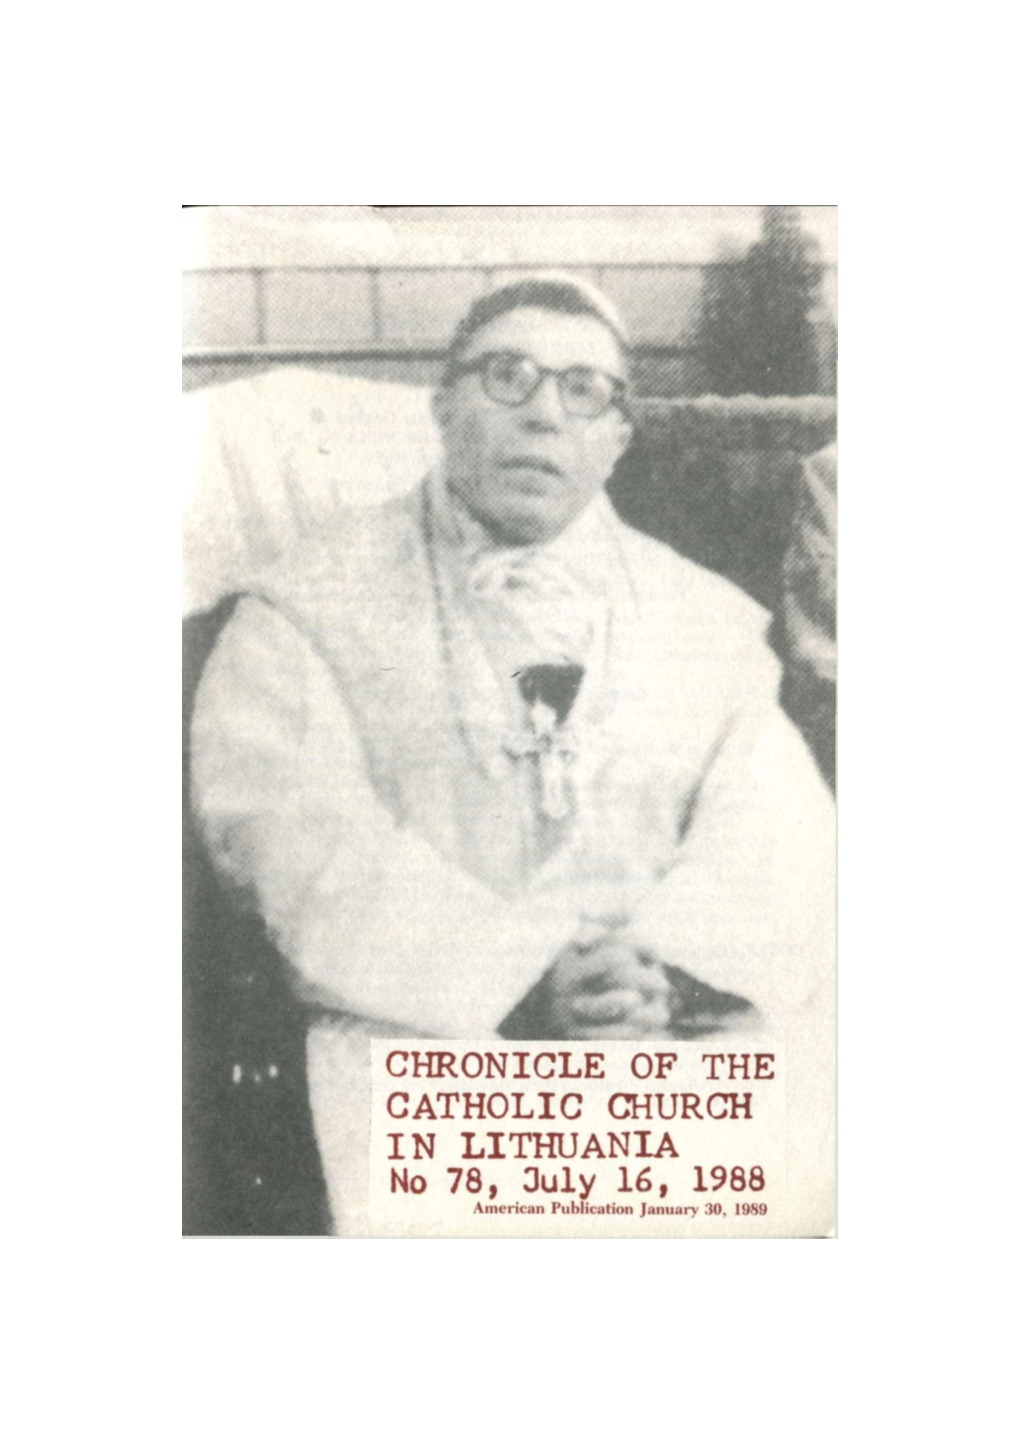 Chronicle of the Catholic Church in Lithuania, No. 78 I Lithuania Was Left with a Single Bishop, Kazimieras Paltarokas of Panevėžys